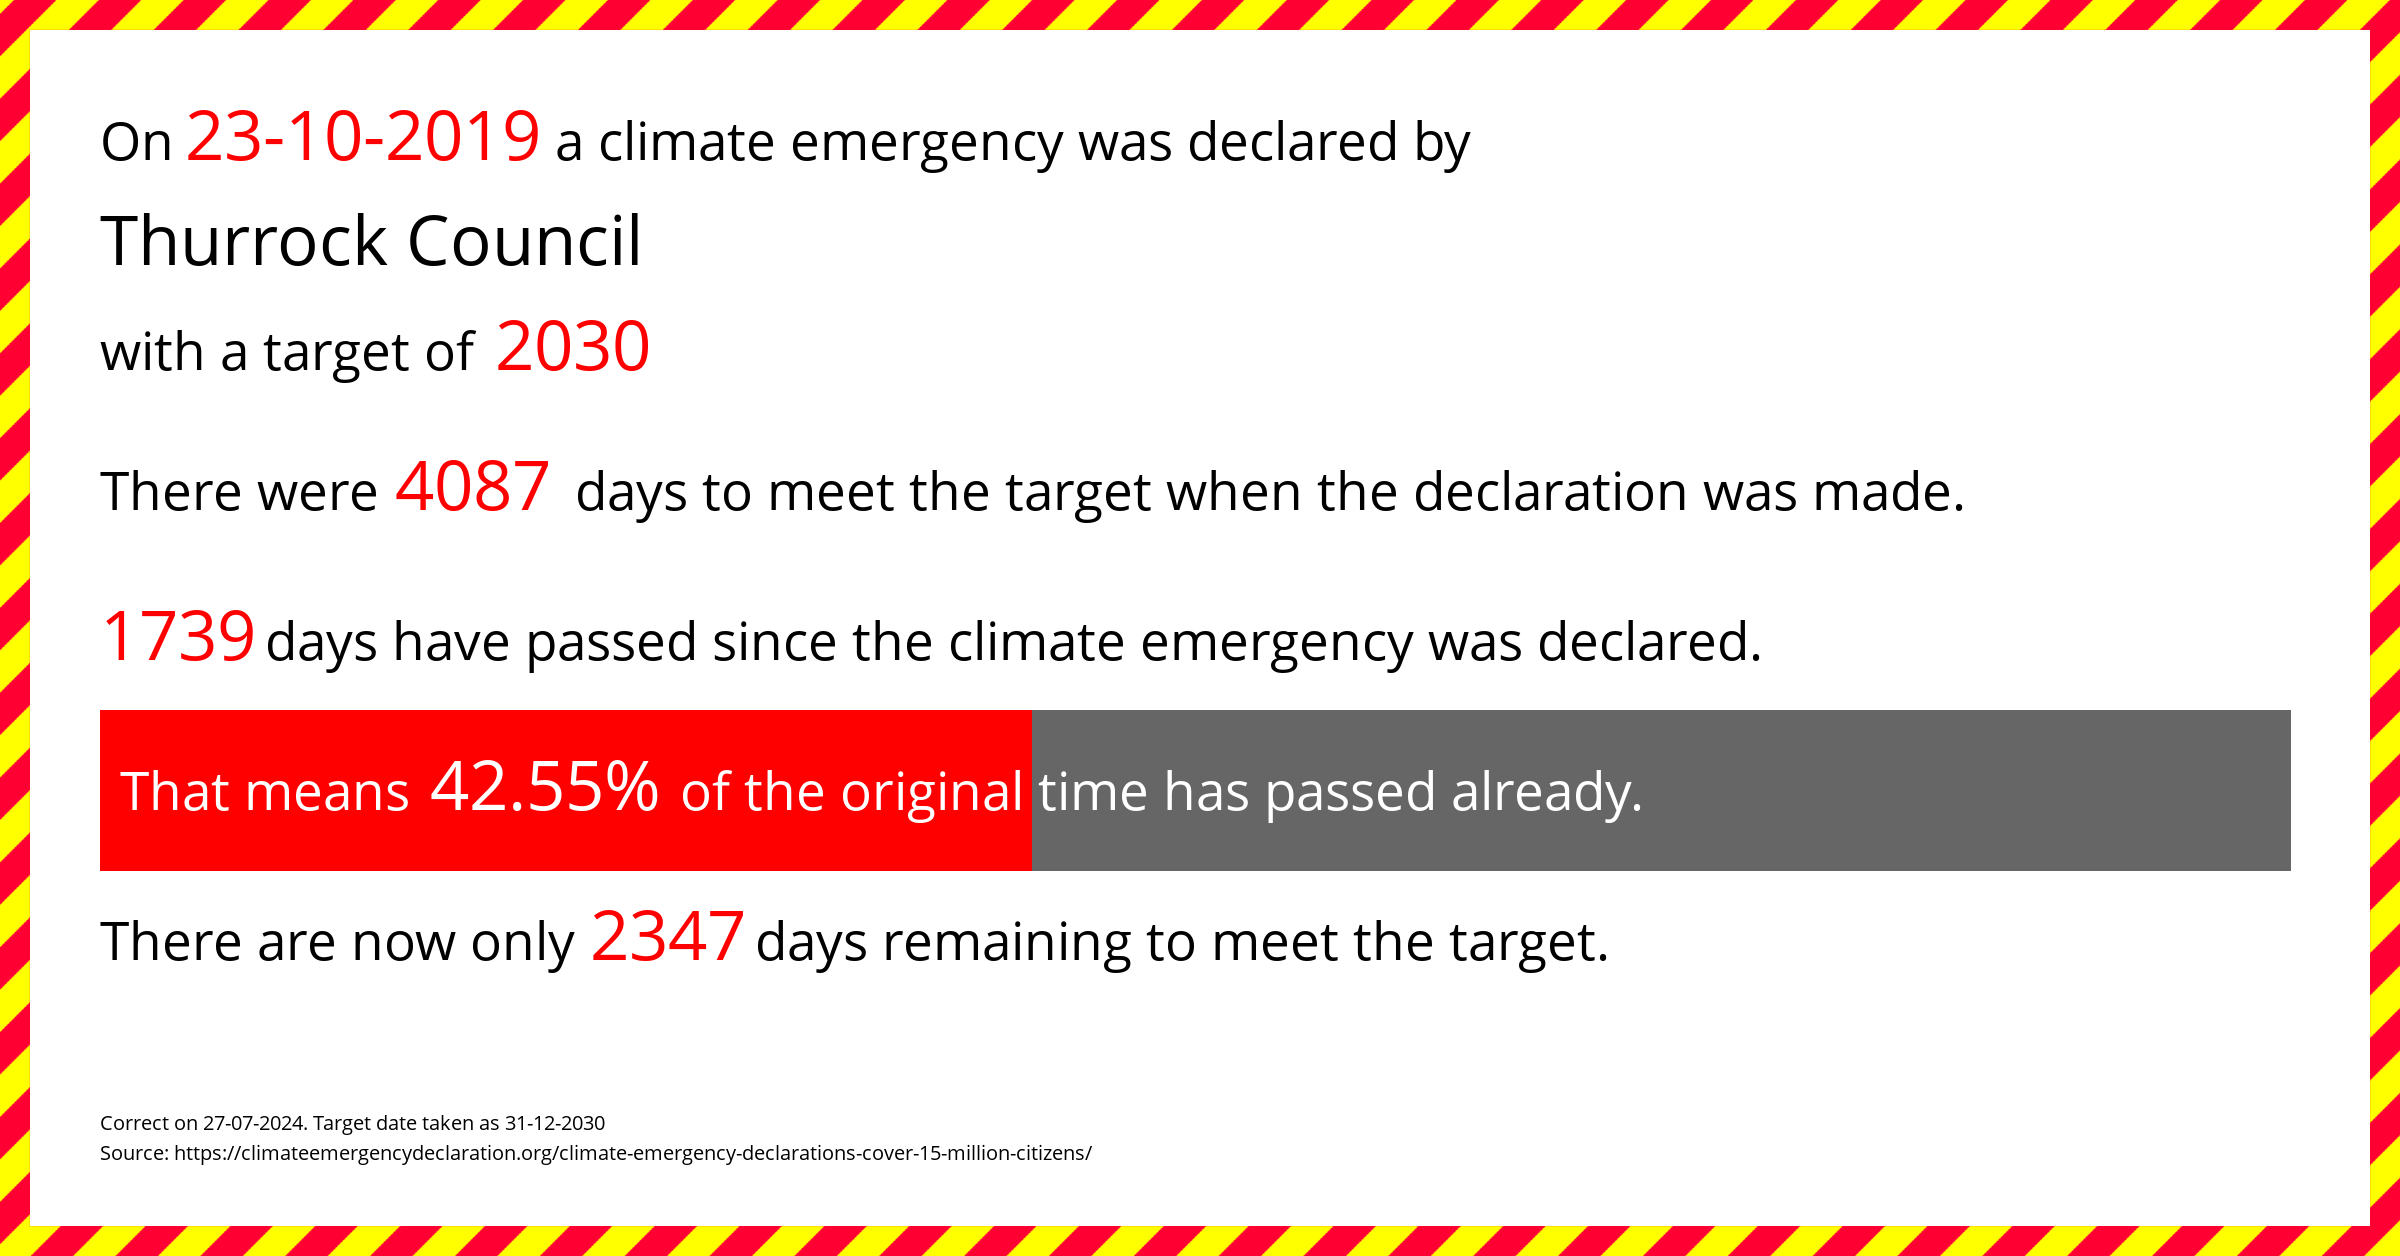 Thurrock Council  declared a Climate emergency on Wednesday 23rd October 2019, with a target of 2030.